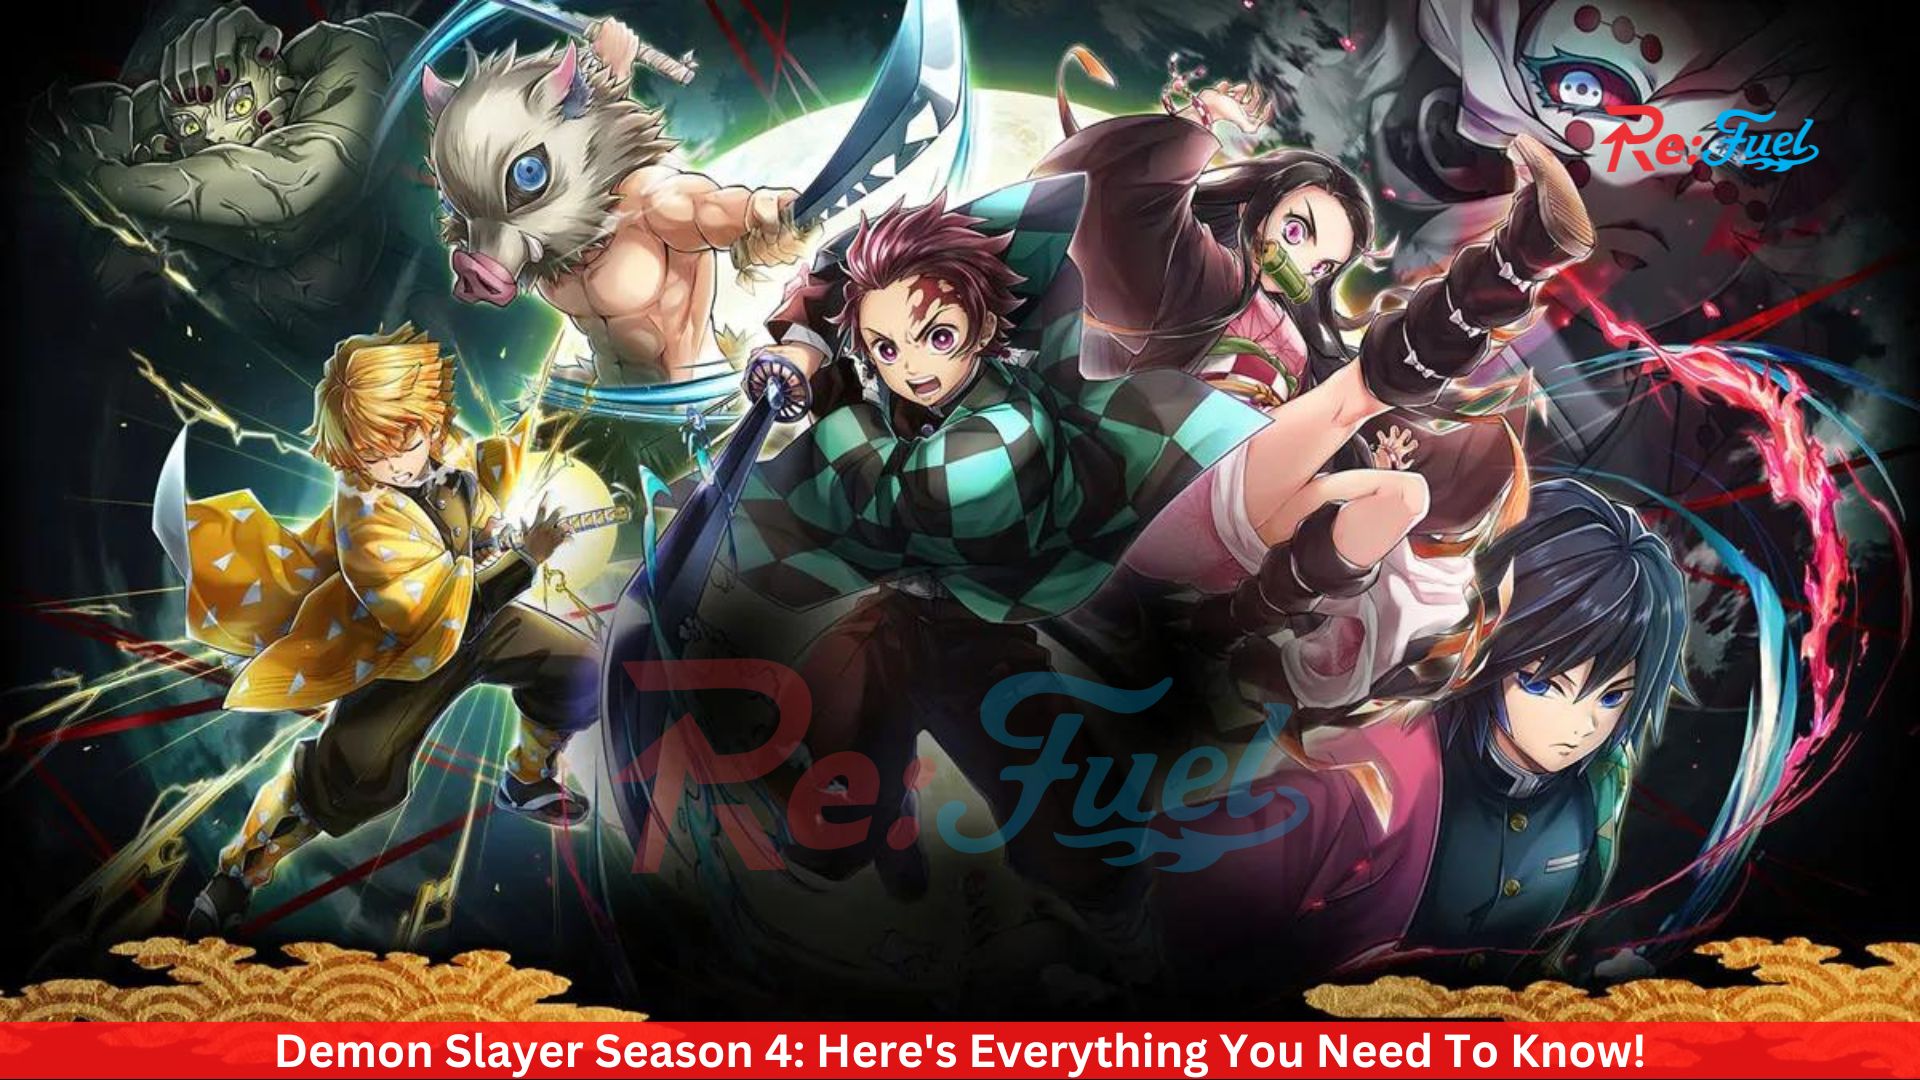 Demon Slayer Season 4: Here's Everything You Need To Know!